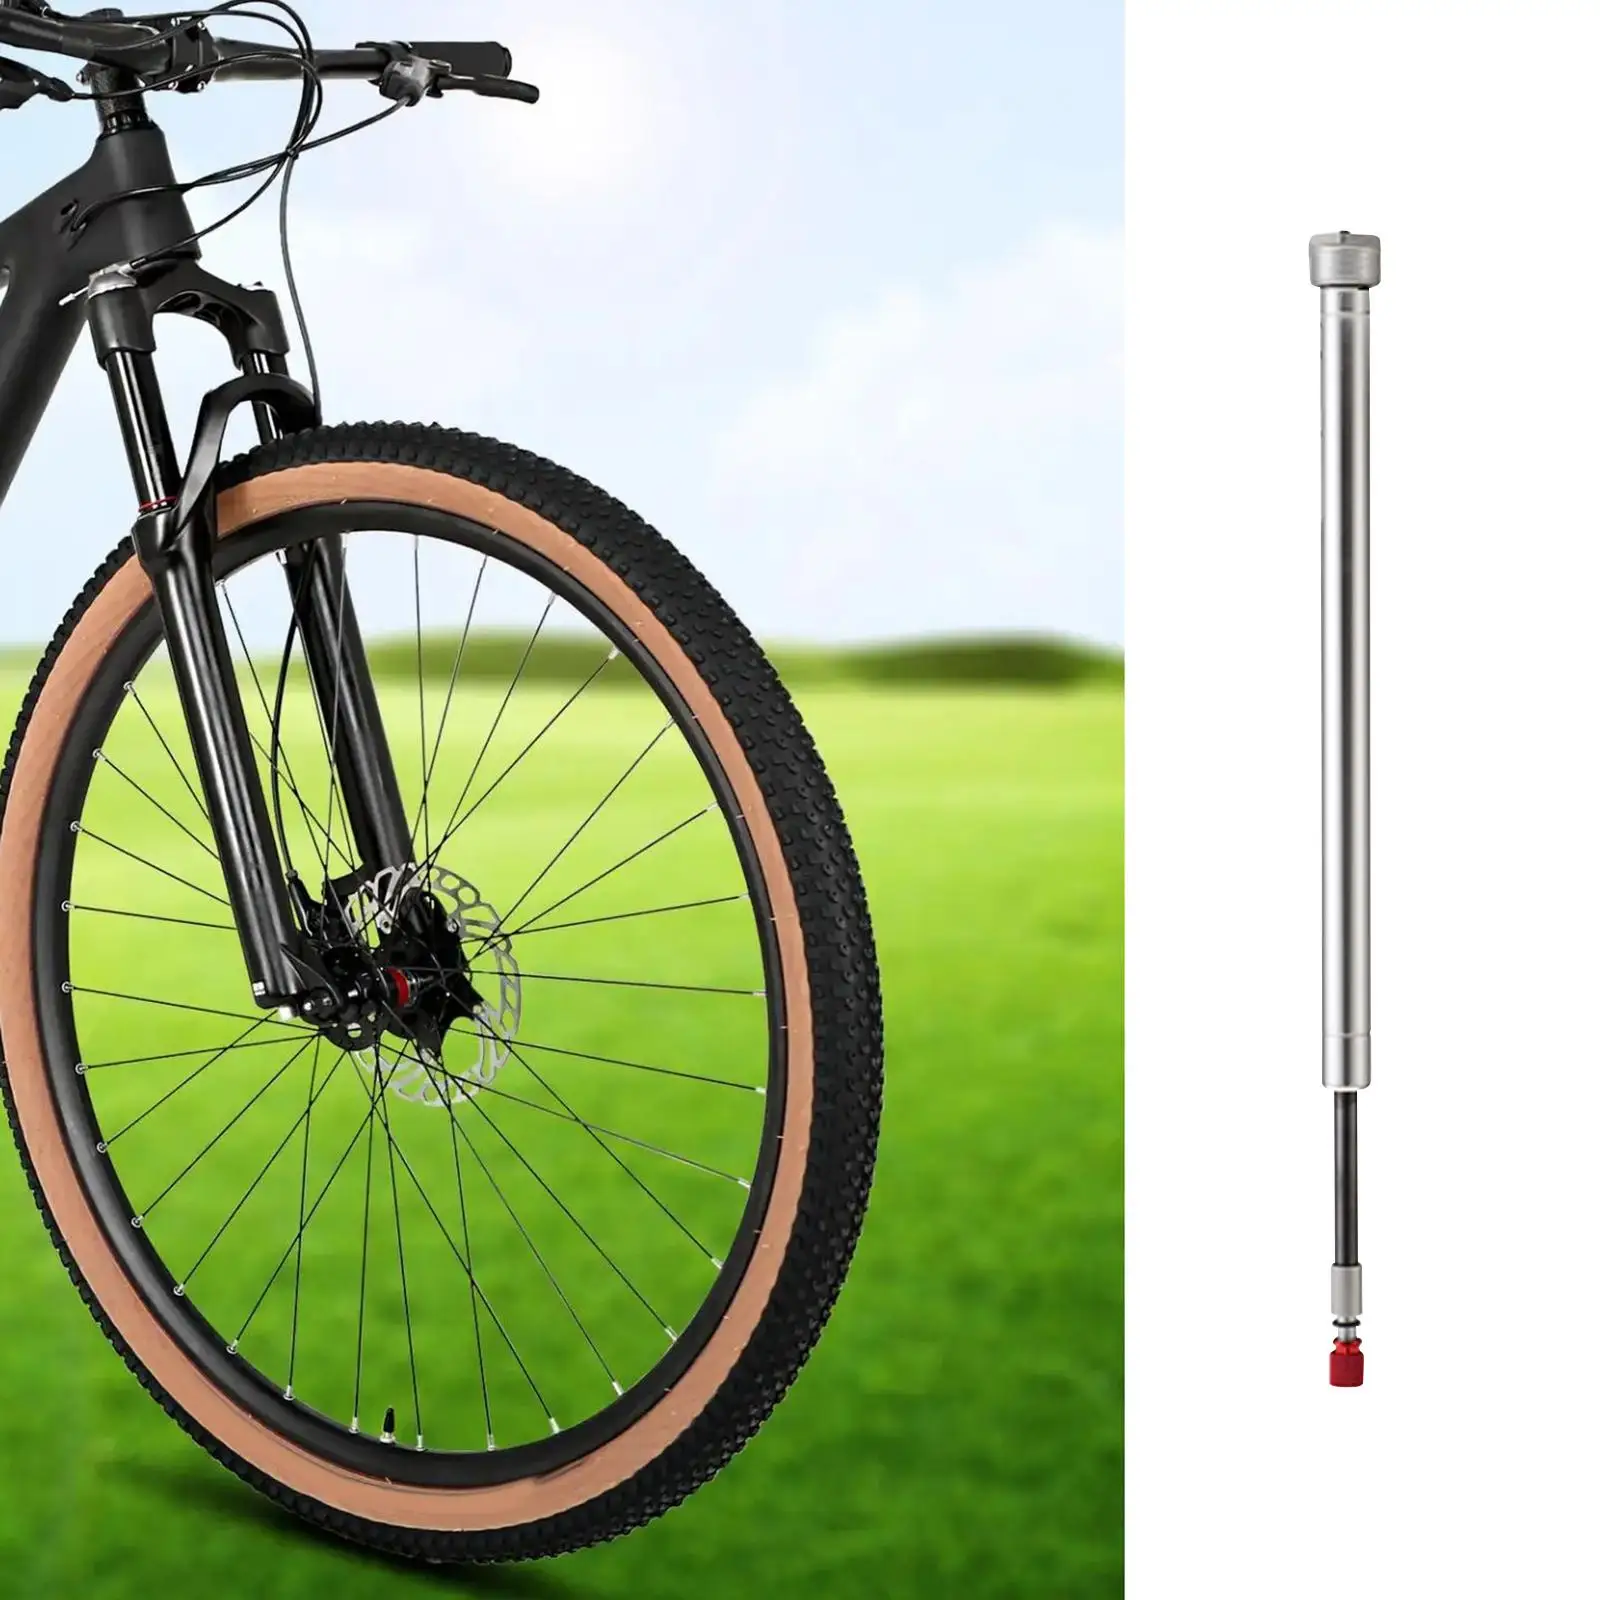 Front Fork Repair Rod Professional Shoulder Control Accessories Sturdy Oil Damping Fork Air Pneumatic Rod for Mountain Bike